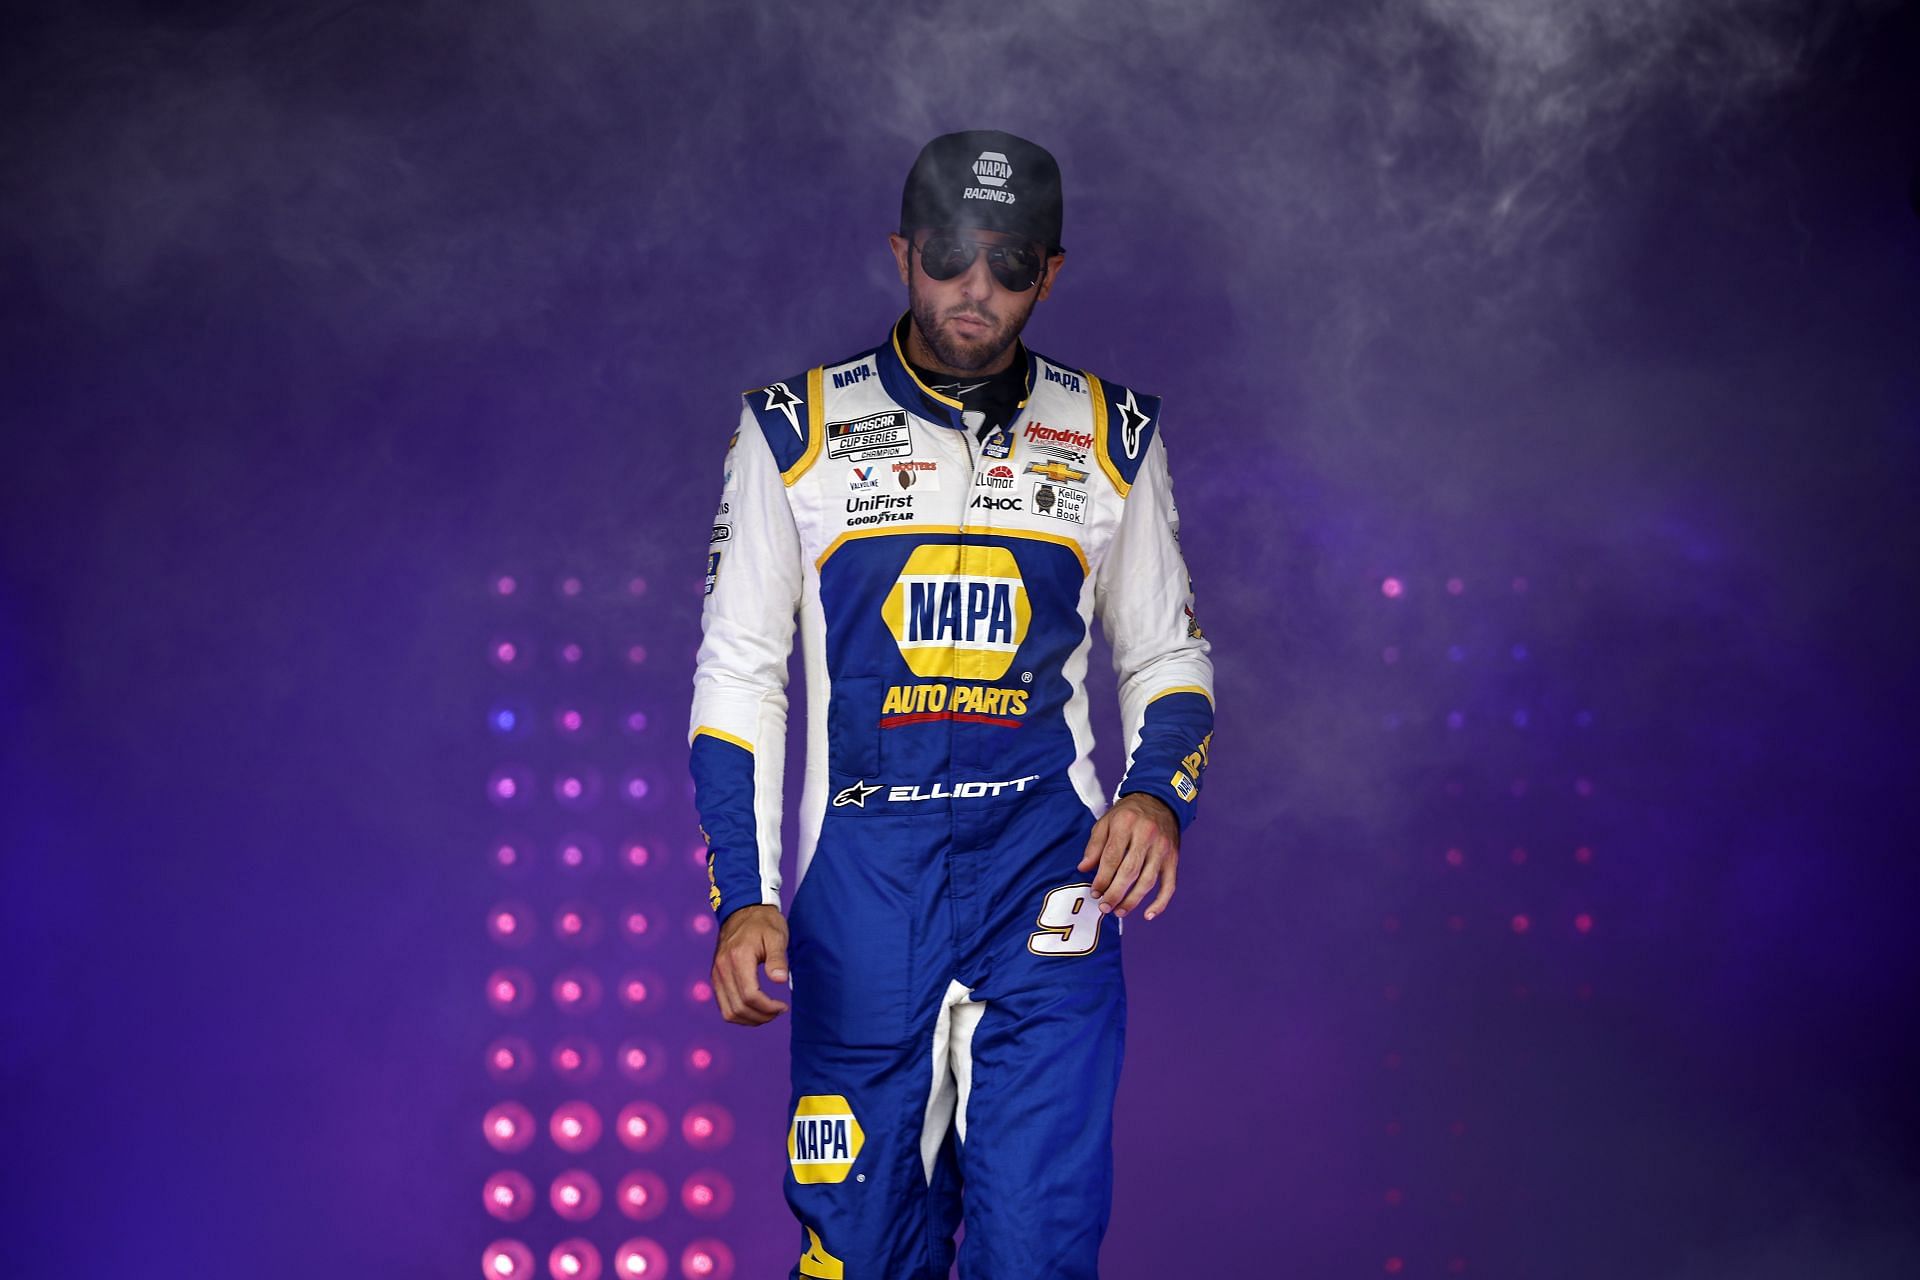 Chase Elliott walks onstage during driver intros before the 2022 NASCAR Cup Series Federated Auto Parts 400 at Richmond Raceway in Richmond, Virginia (Photo by Chris Graythen/Getty Images)